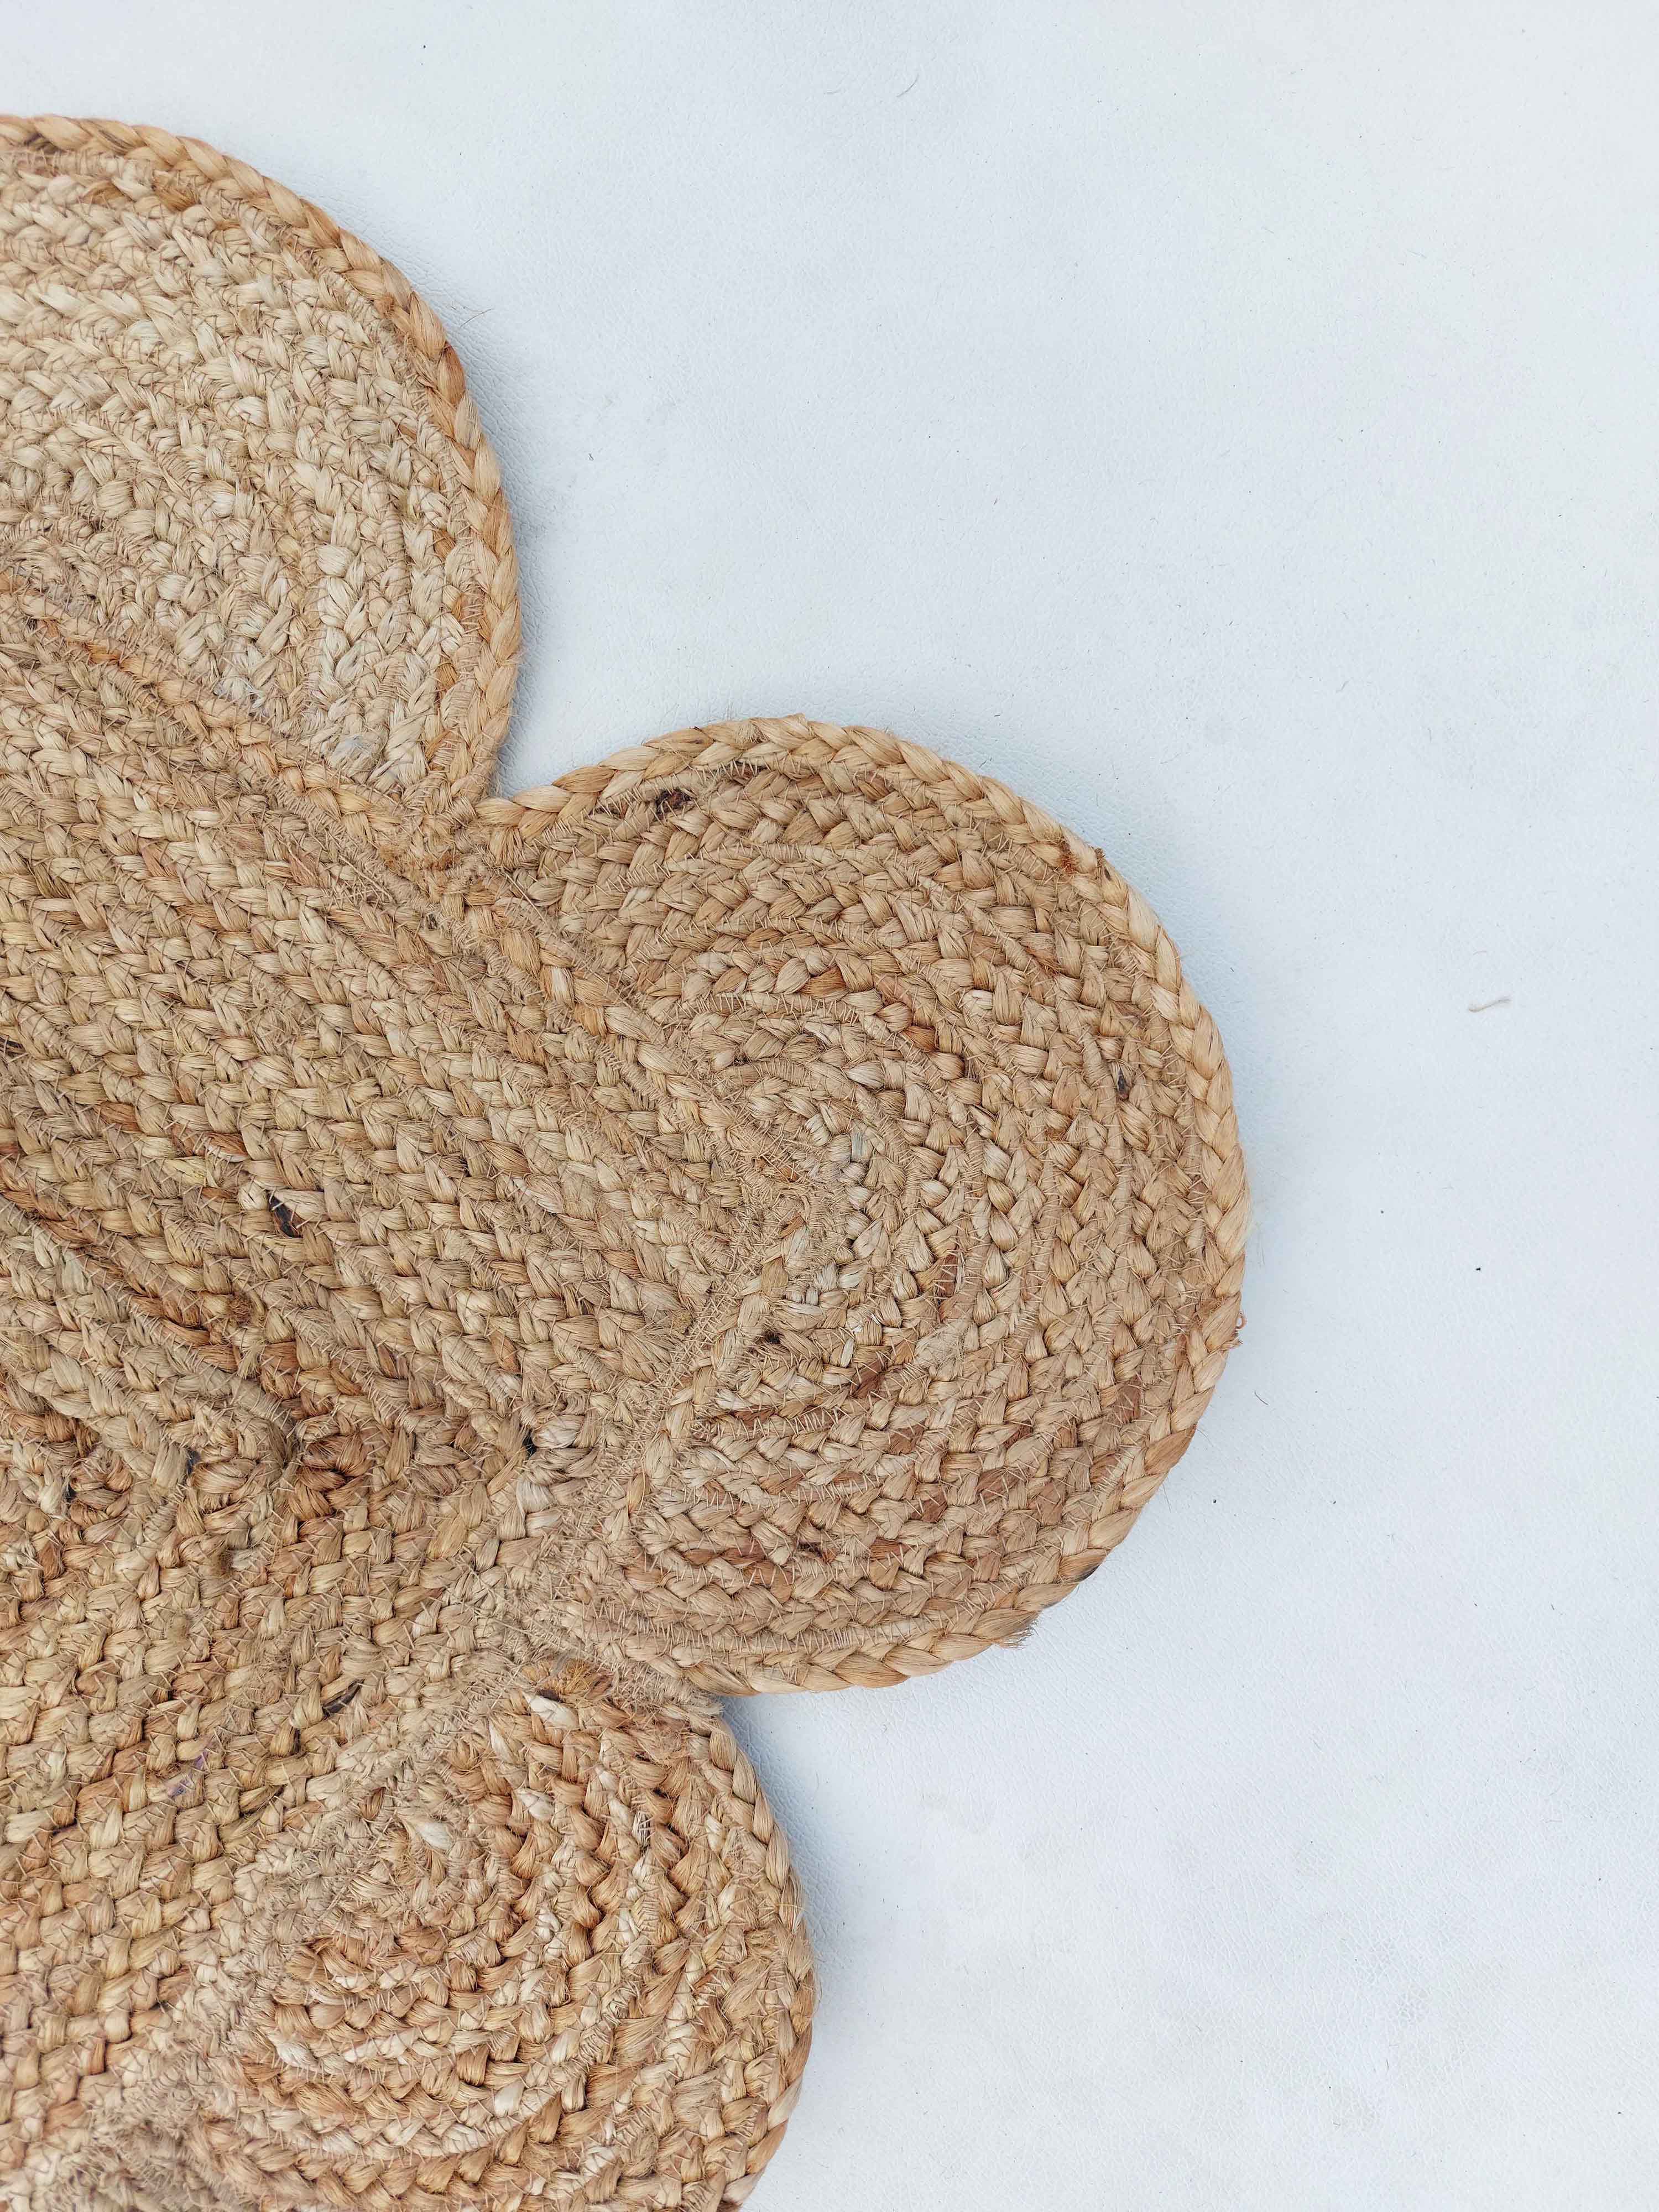 A Scalloped Jute Rug for the Closet — The Grit and Polish